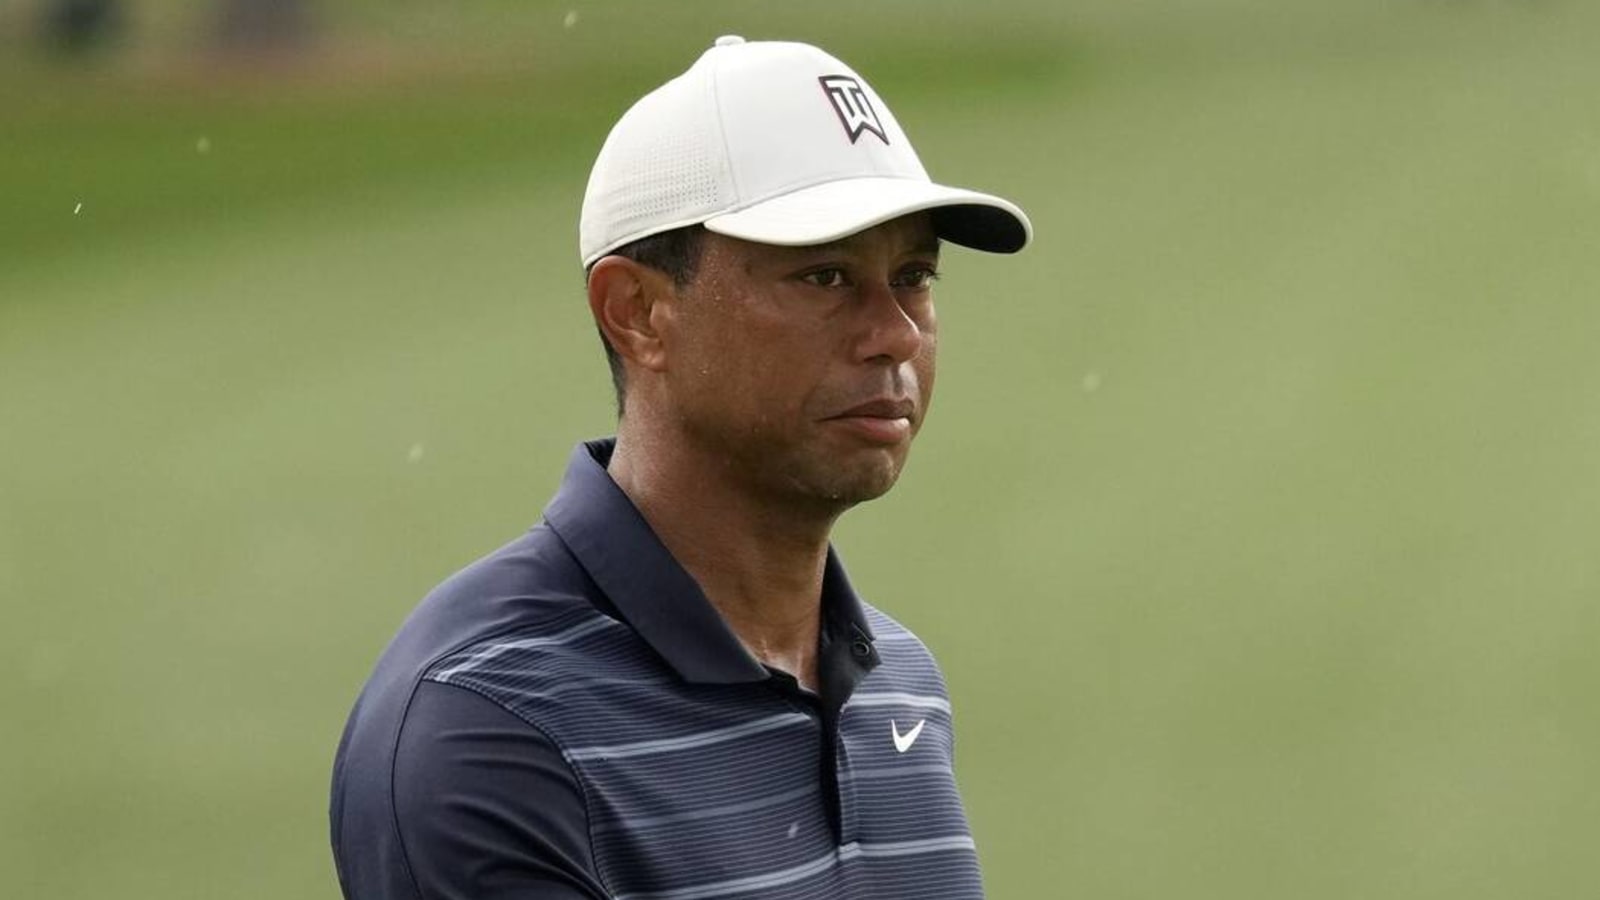 Tiger Woods withdraws from Masters due to injury Yardbarker